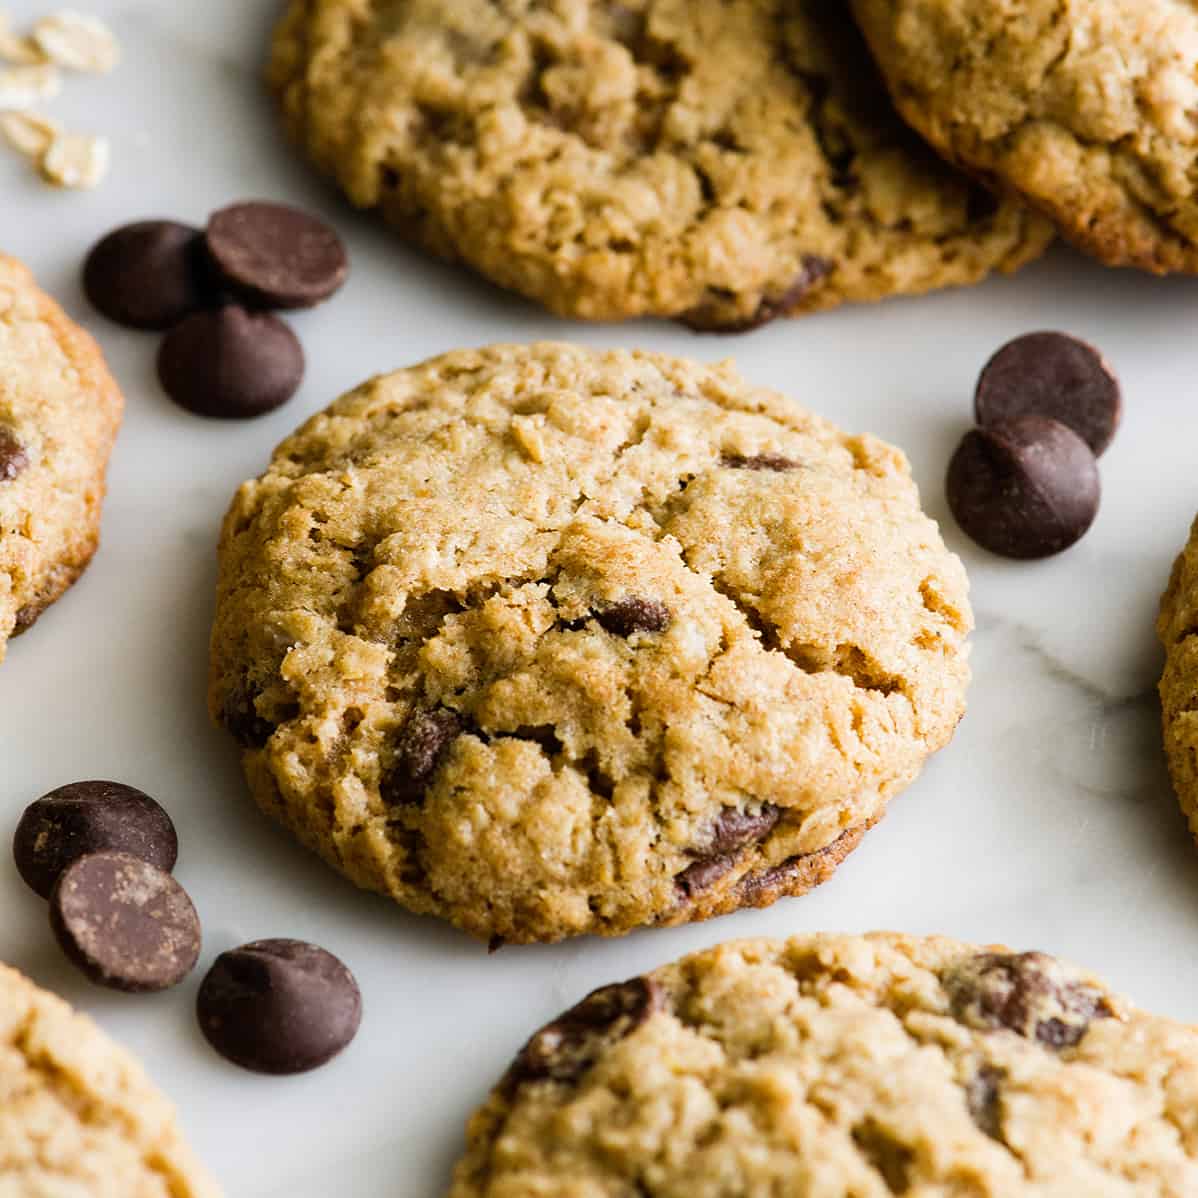 4 lactation cookies with chocolate chips